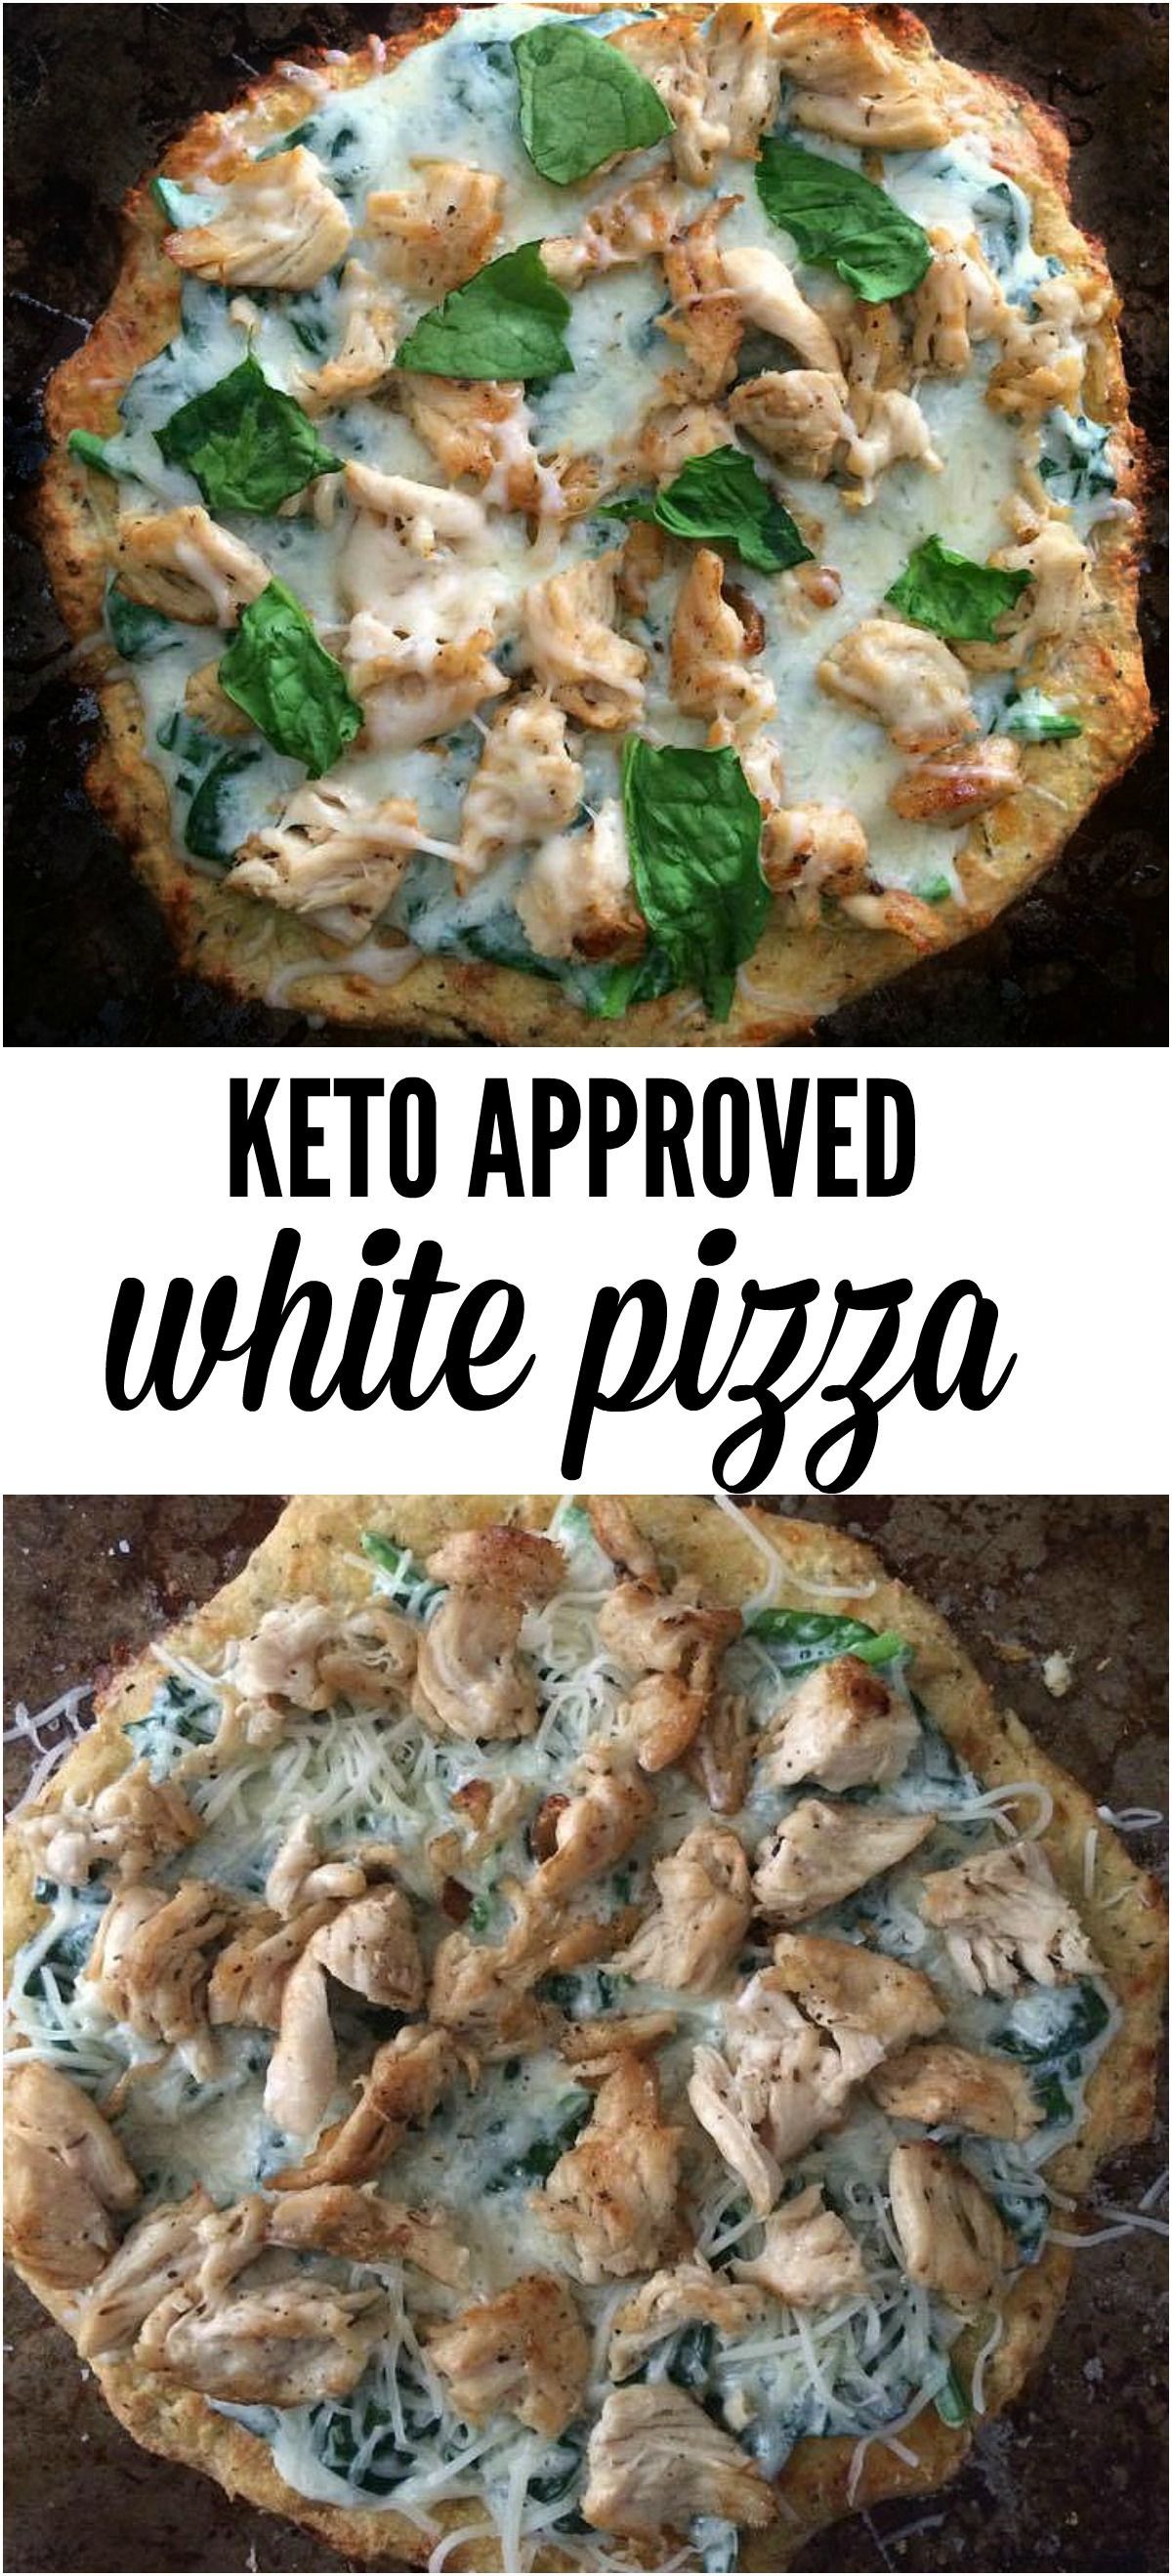 Are you following the keto way of eating? Then you HAVE to try this white keto pizza! Cheesy, satisfying greatness and only 2.5